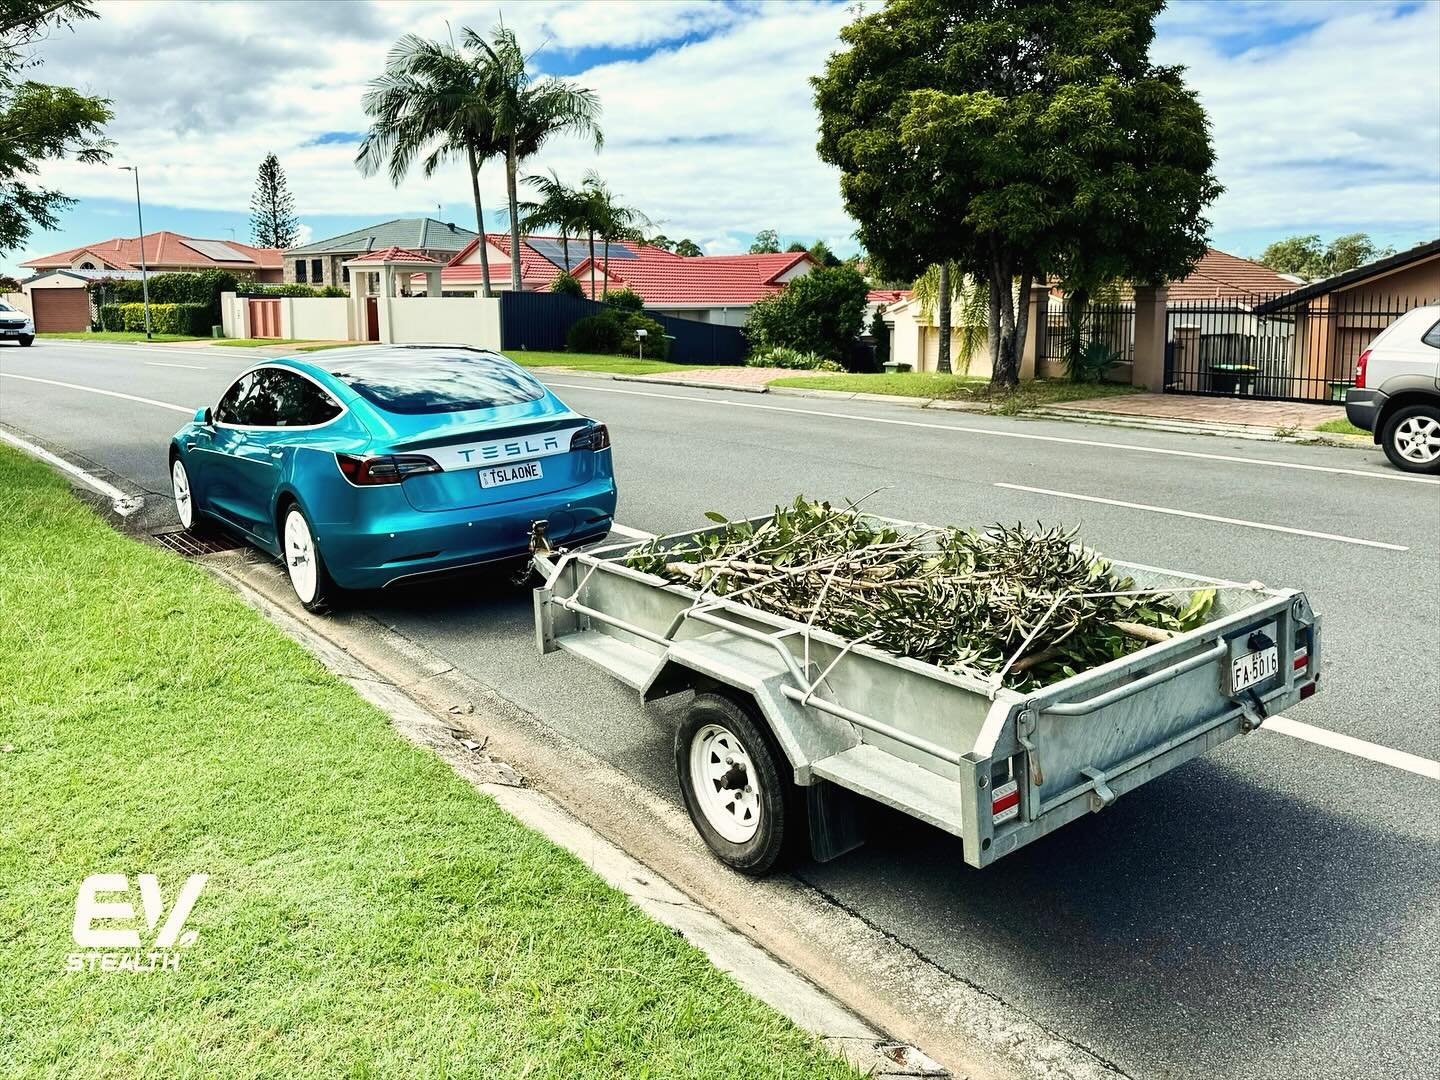 Taking out green waste sustainably with the #teslamodel3 😉 
.
.
.
.
#evstealth #evstealthsolutions #evtowing #evtowbars #sustainabletransport #emobility #electriccarsaustralia #electricvehicles #stealthmode #tesla #electricvehicletowbars #ev #biking